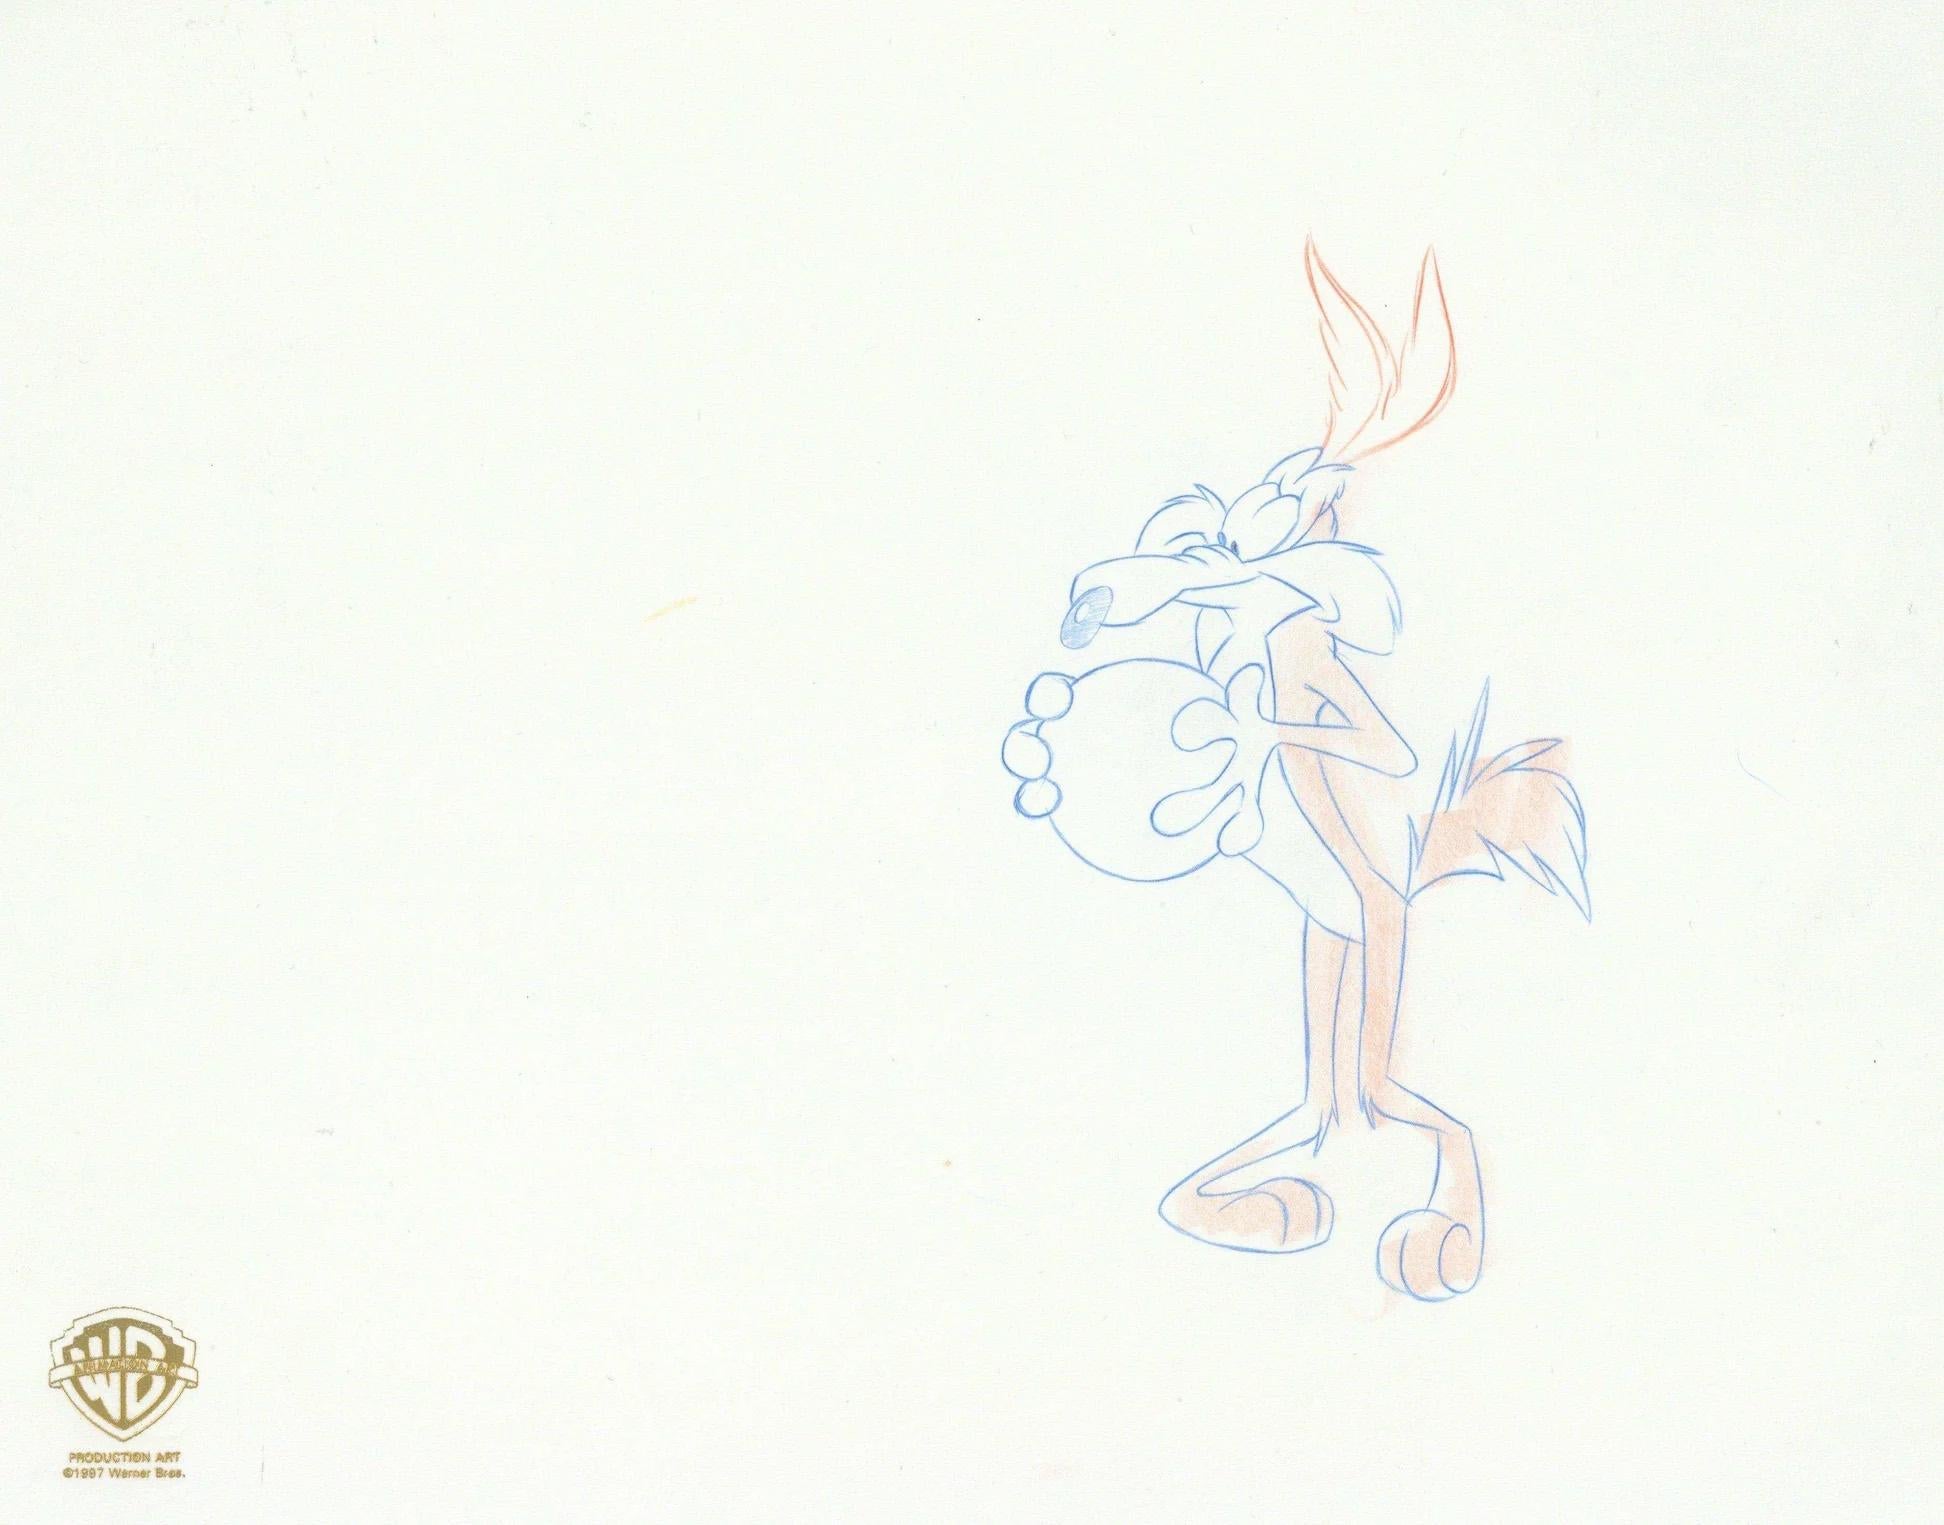 Space Jam Original Production Drawing: Wile E. Coyote - Art by Looney Tunes Studio Artists